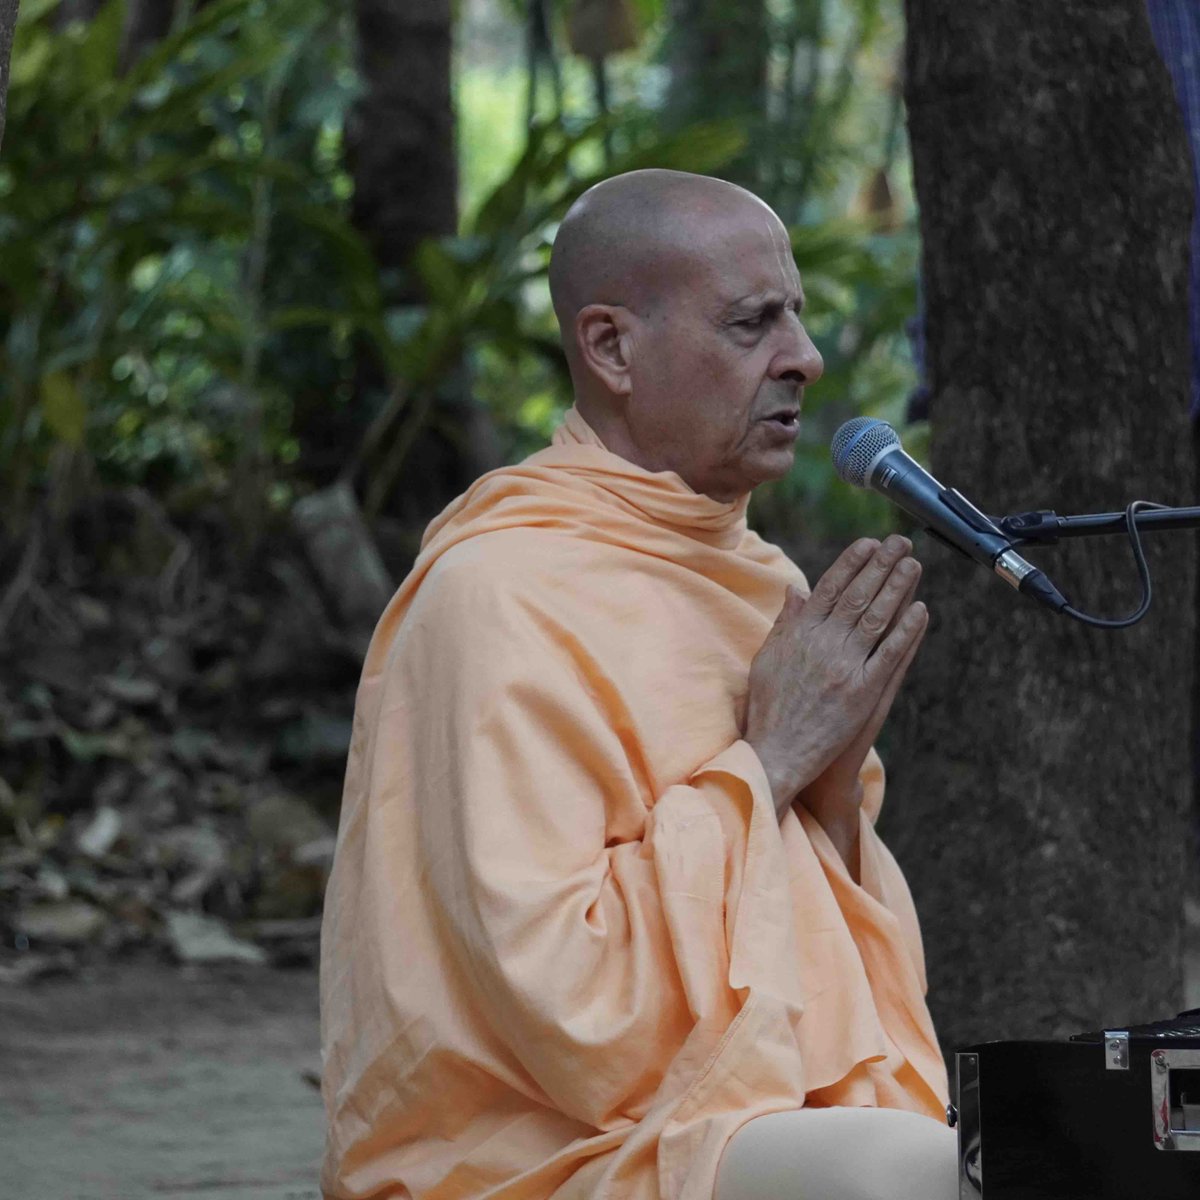 “Spirituality and religion are not for philosophical debate but for transforming the hearts of people.” - His Holiness Radhanath Swami #spiritual #divinelove #radhanathswami